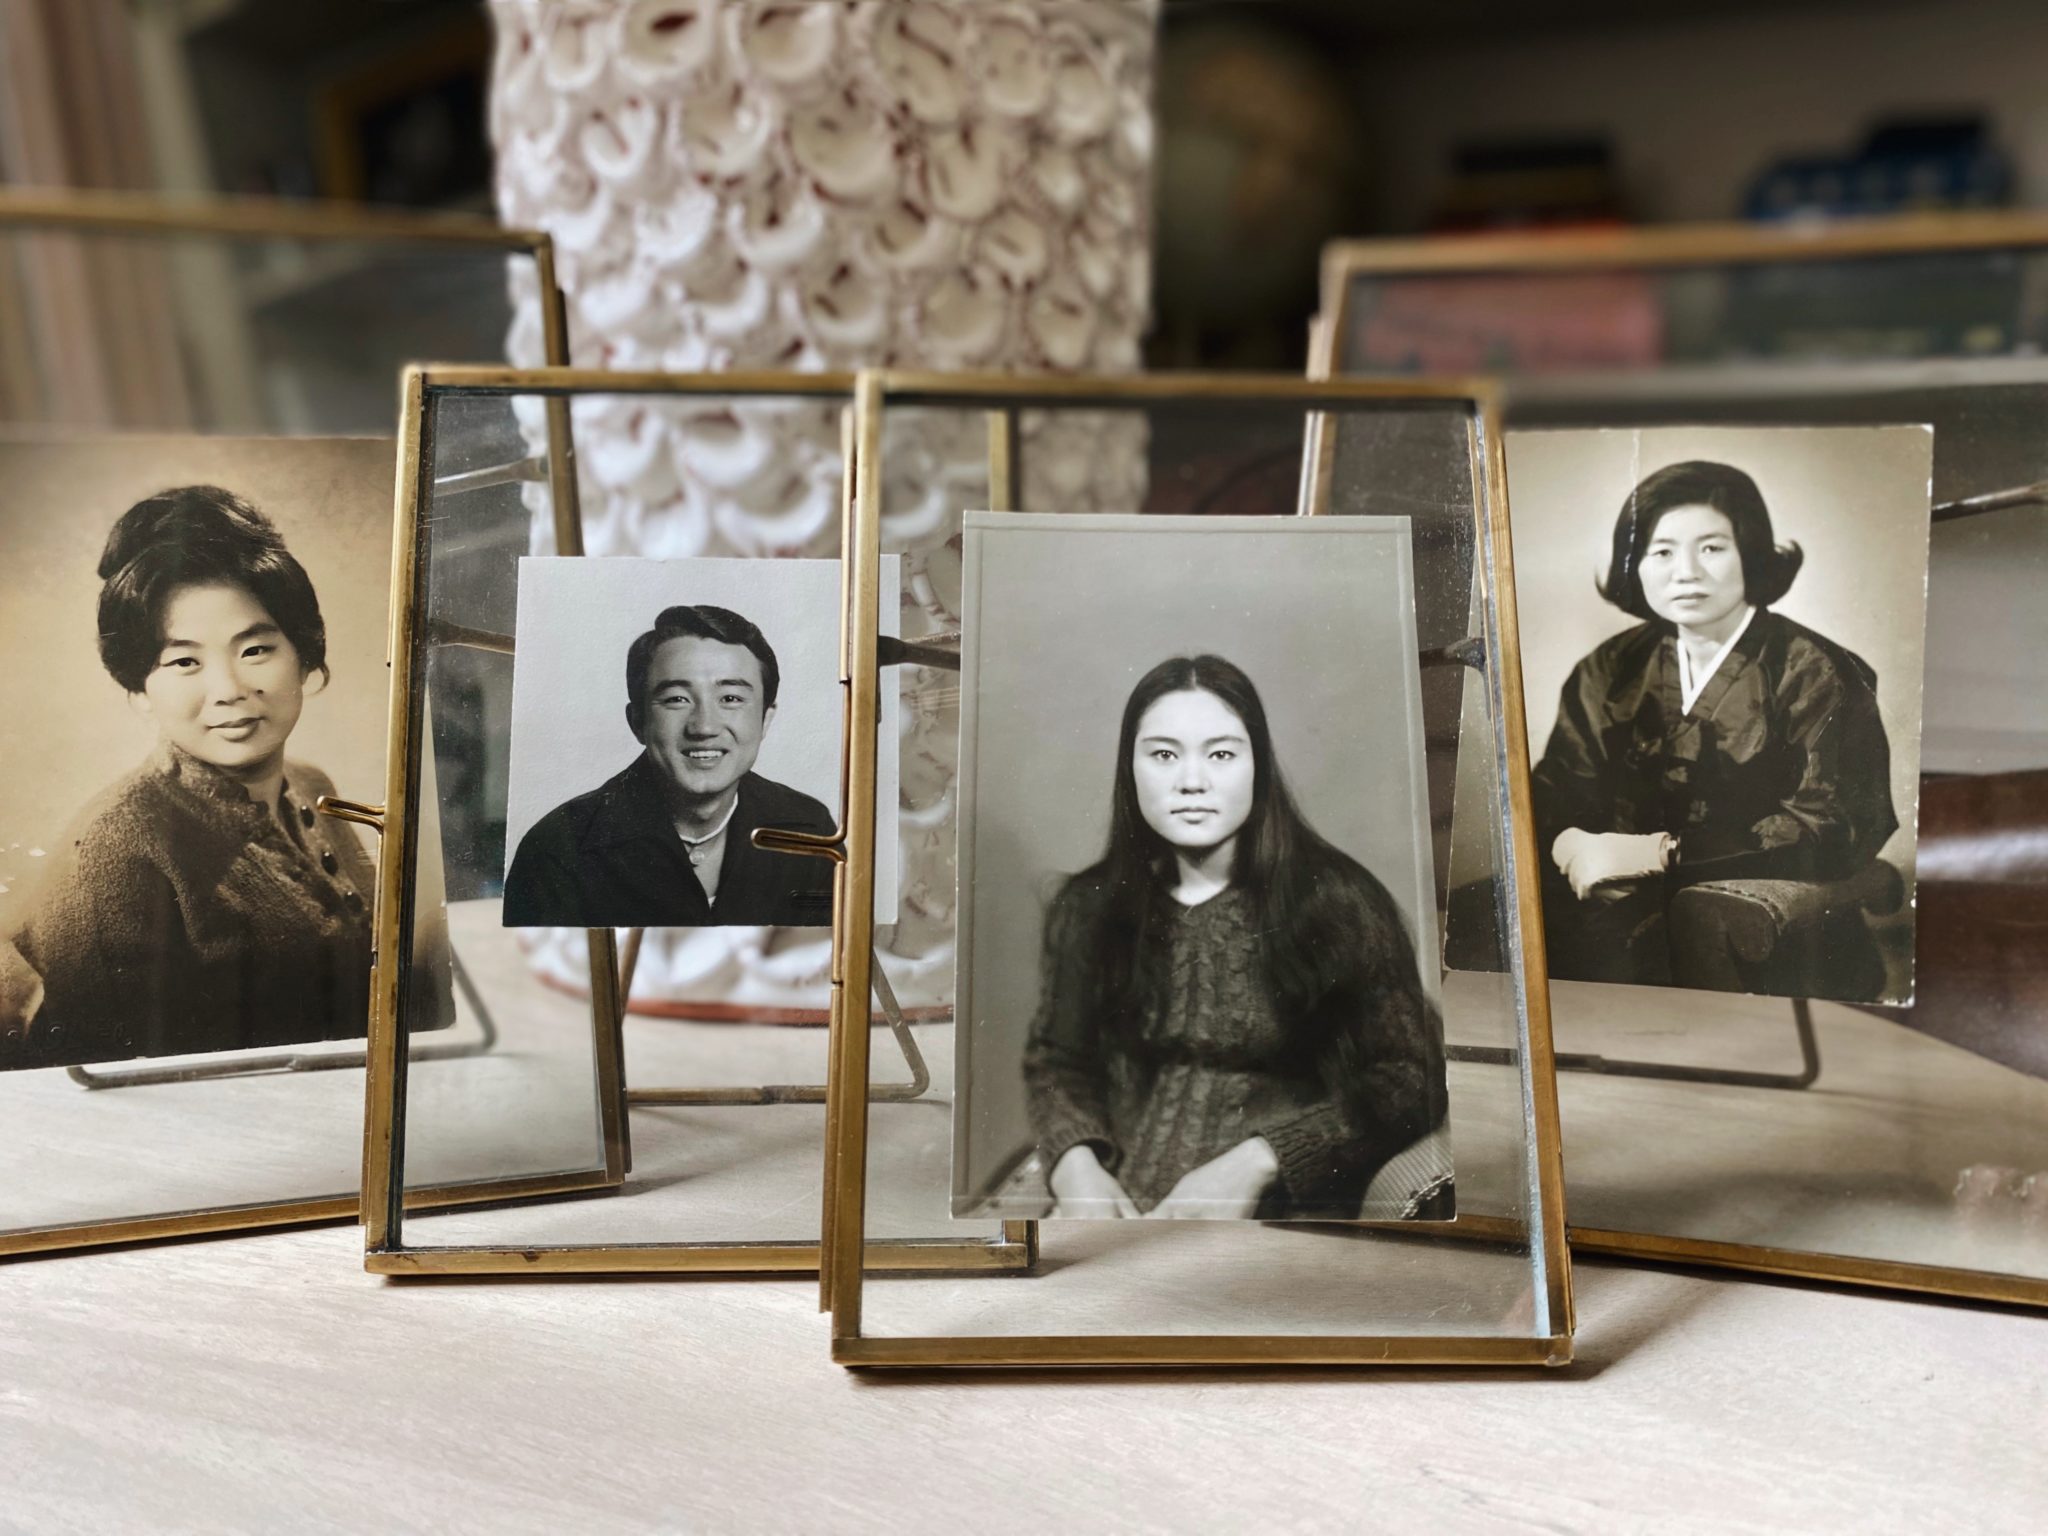 Pictured left to right: Jeanné's grandma YonJu, her dad Stanley, her mom Eudora (she calls 'Oma', mommy in Korean), and grandma Kyong